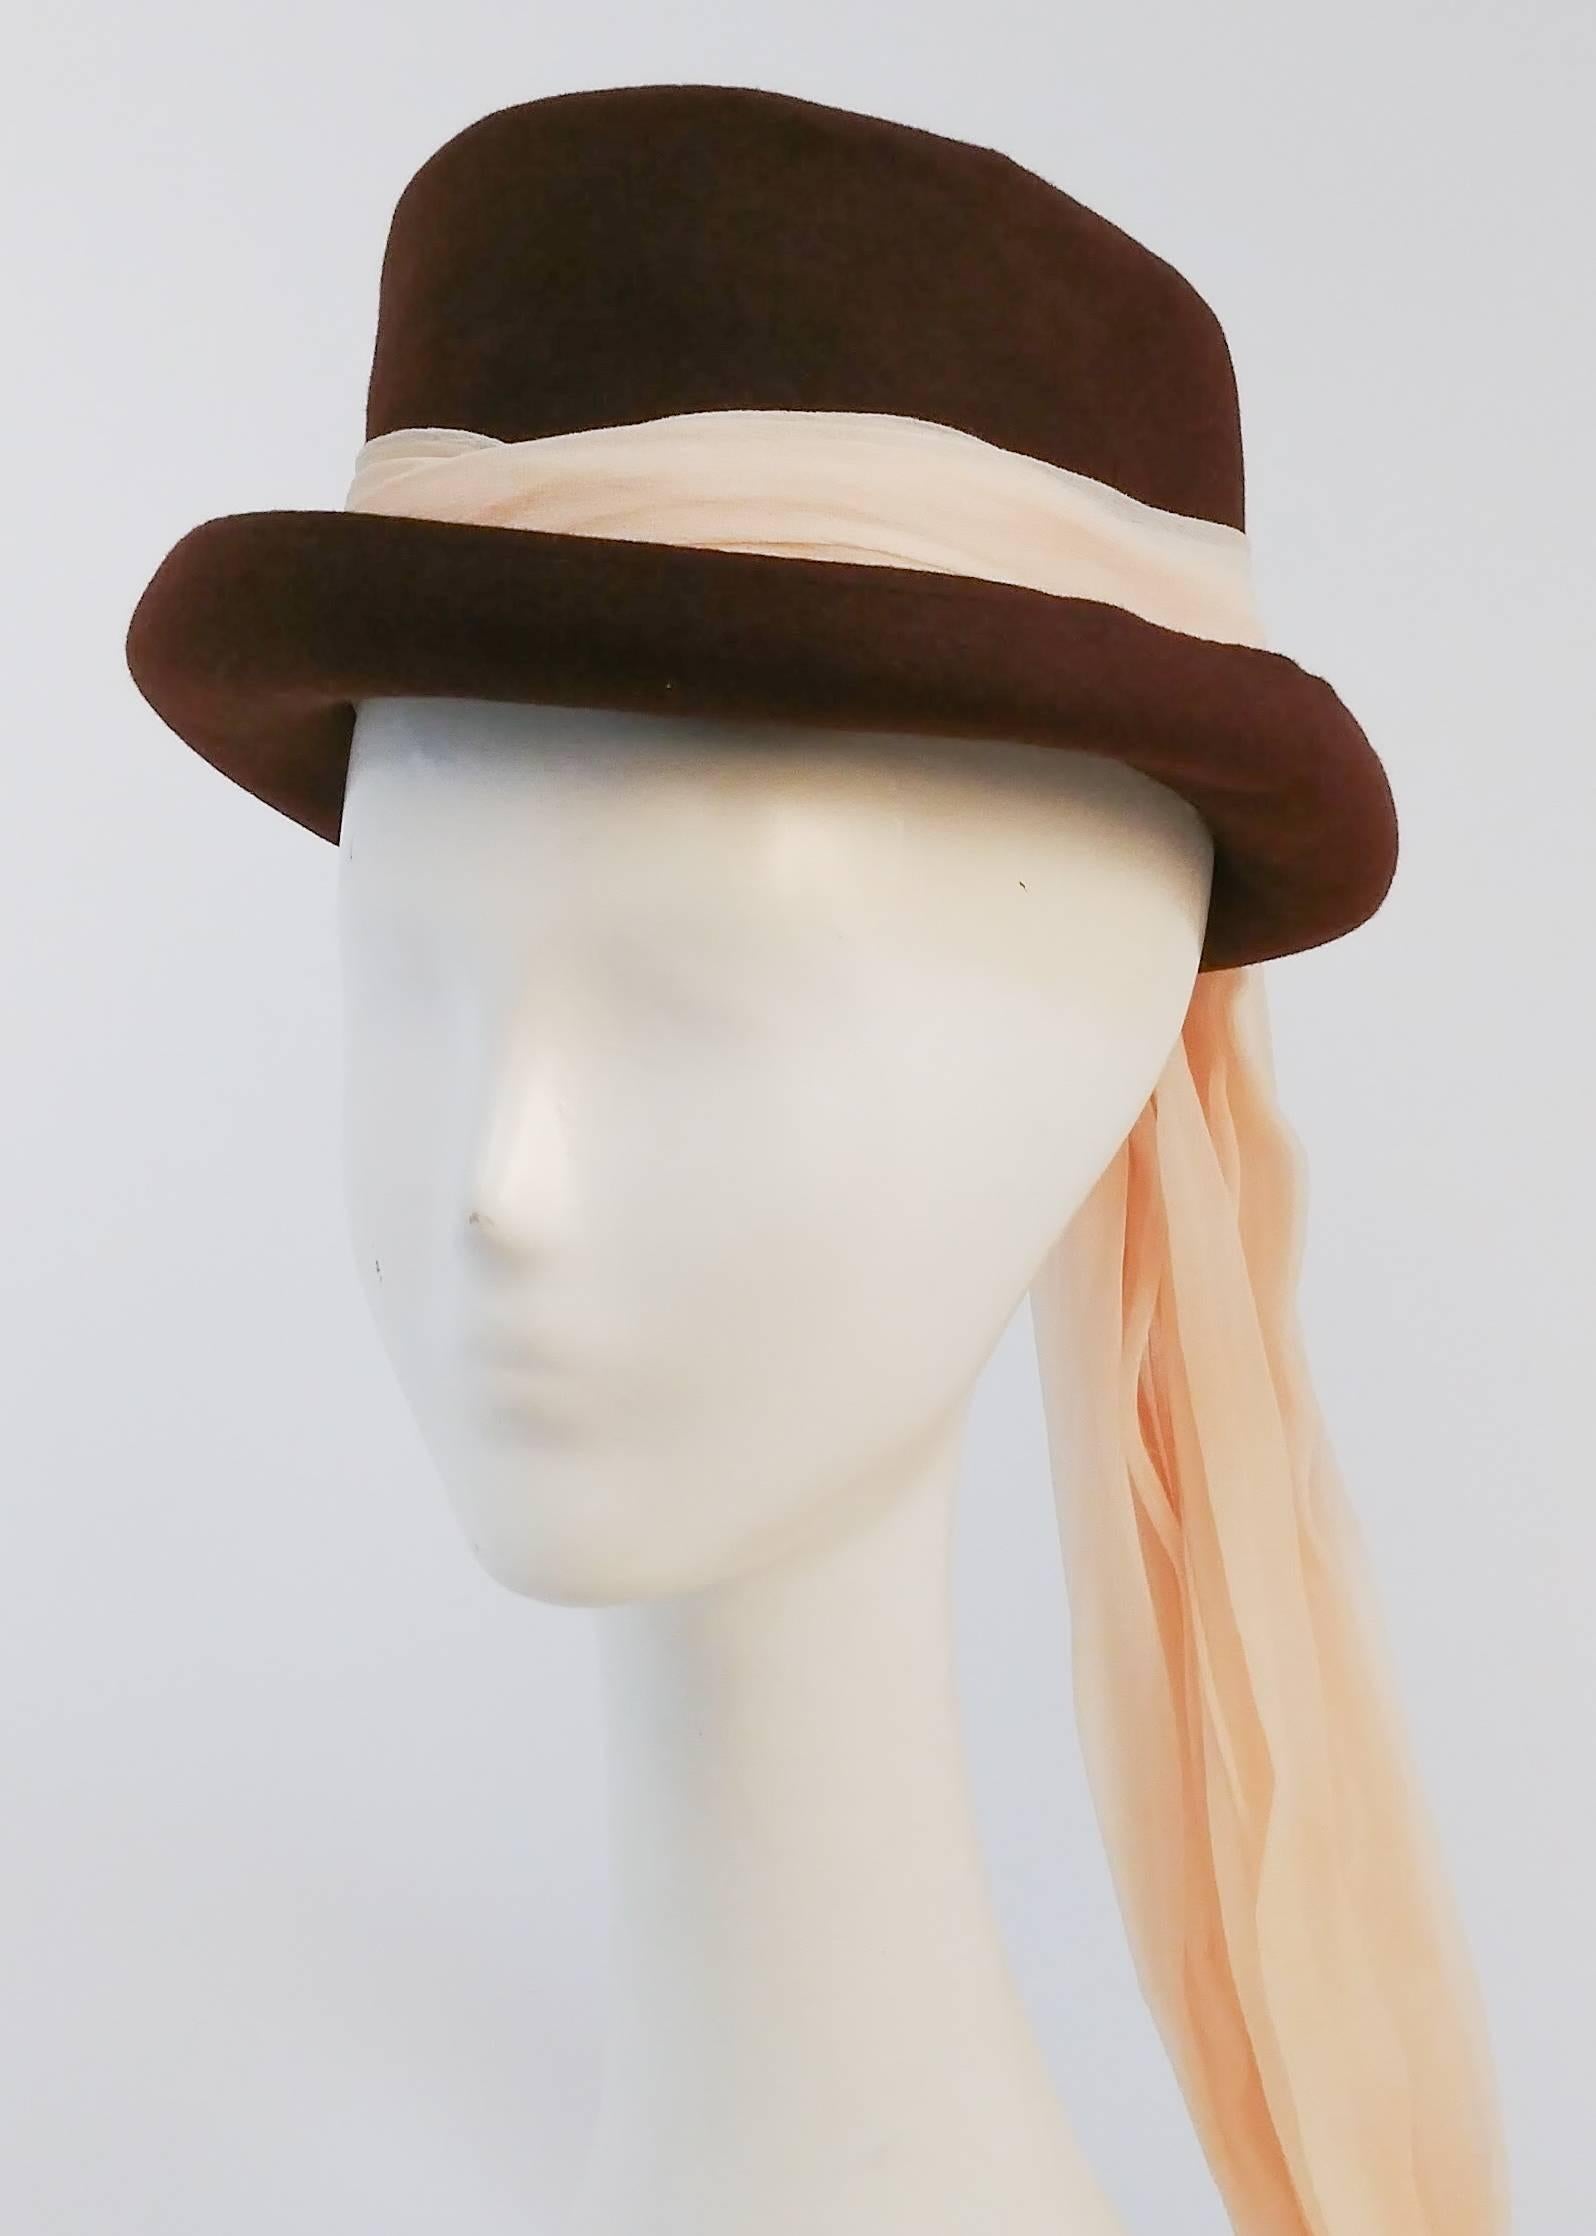 1940s Stetson Fur Felt Hat w/ Long Chiffon Hatband. Smart men's style hat with a feminine twist. Made by the acclaimed hat brand Stetson in the F.N. Arbaugh & Co. Department Store. Size 22. 